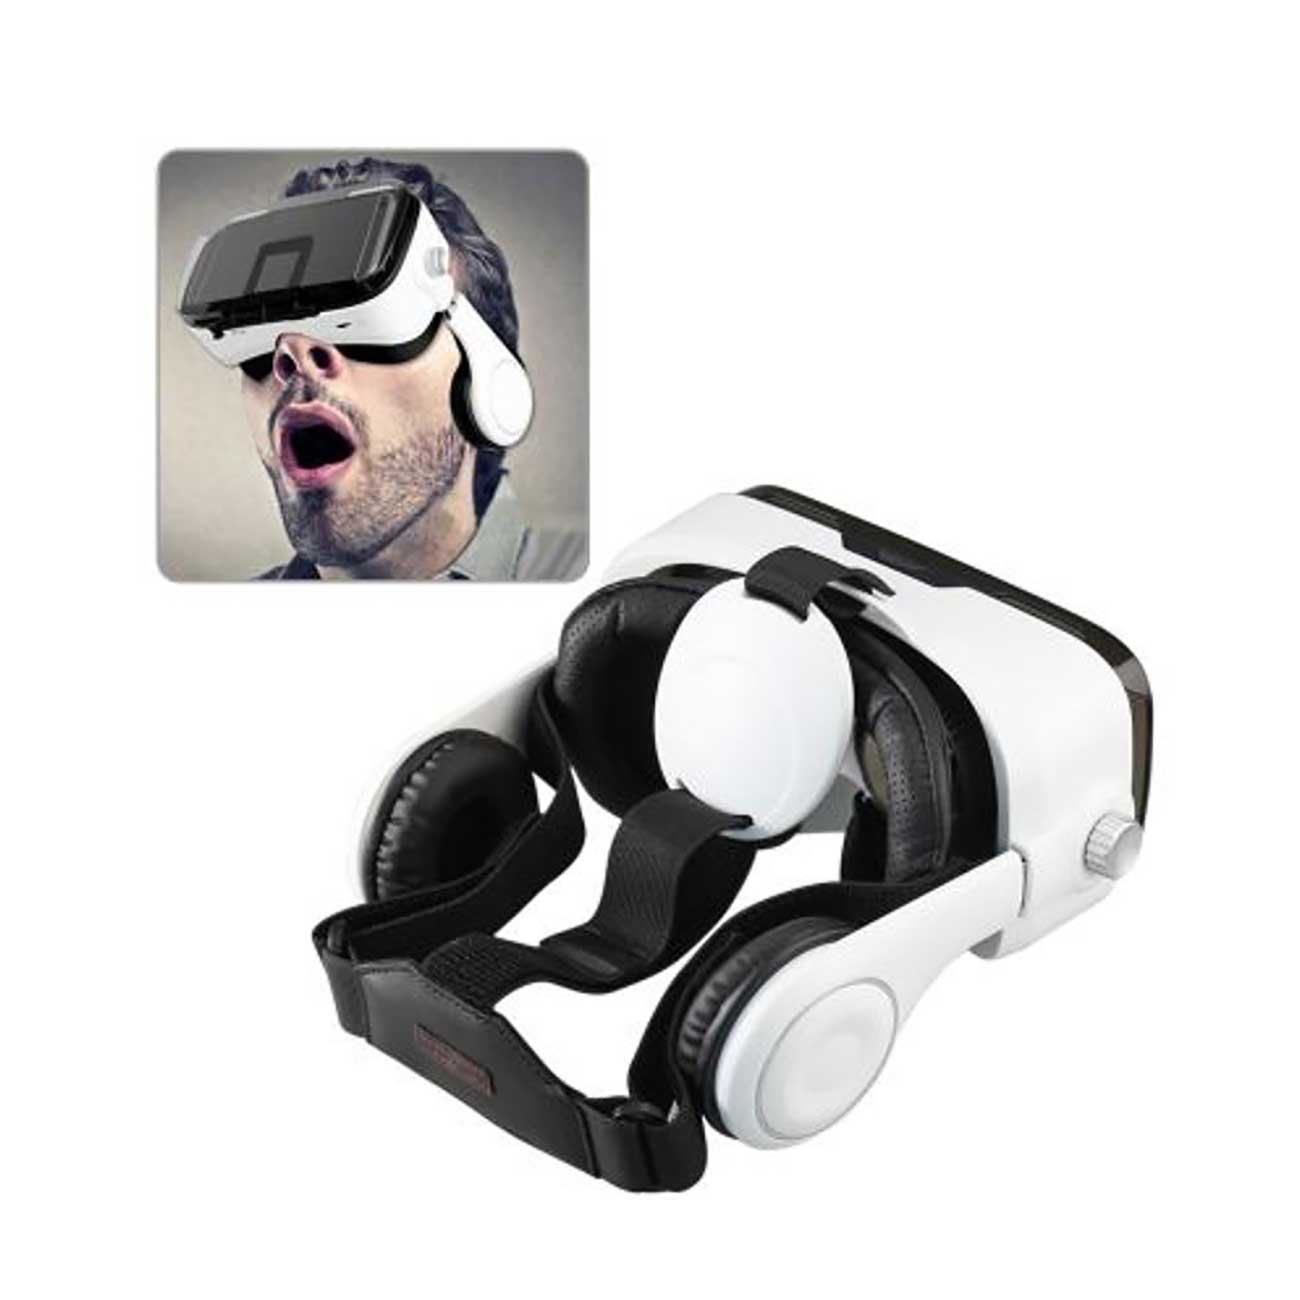 3D Virtual Reality Box (Vr Box) Glasses For 3.5 To 6 Inch Phones With Blutooth Control In Black